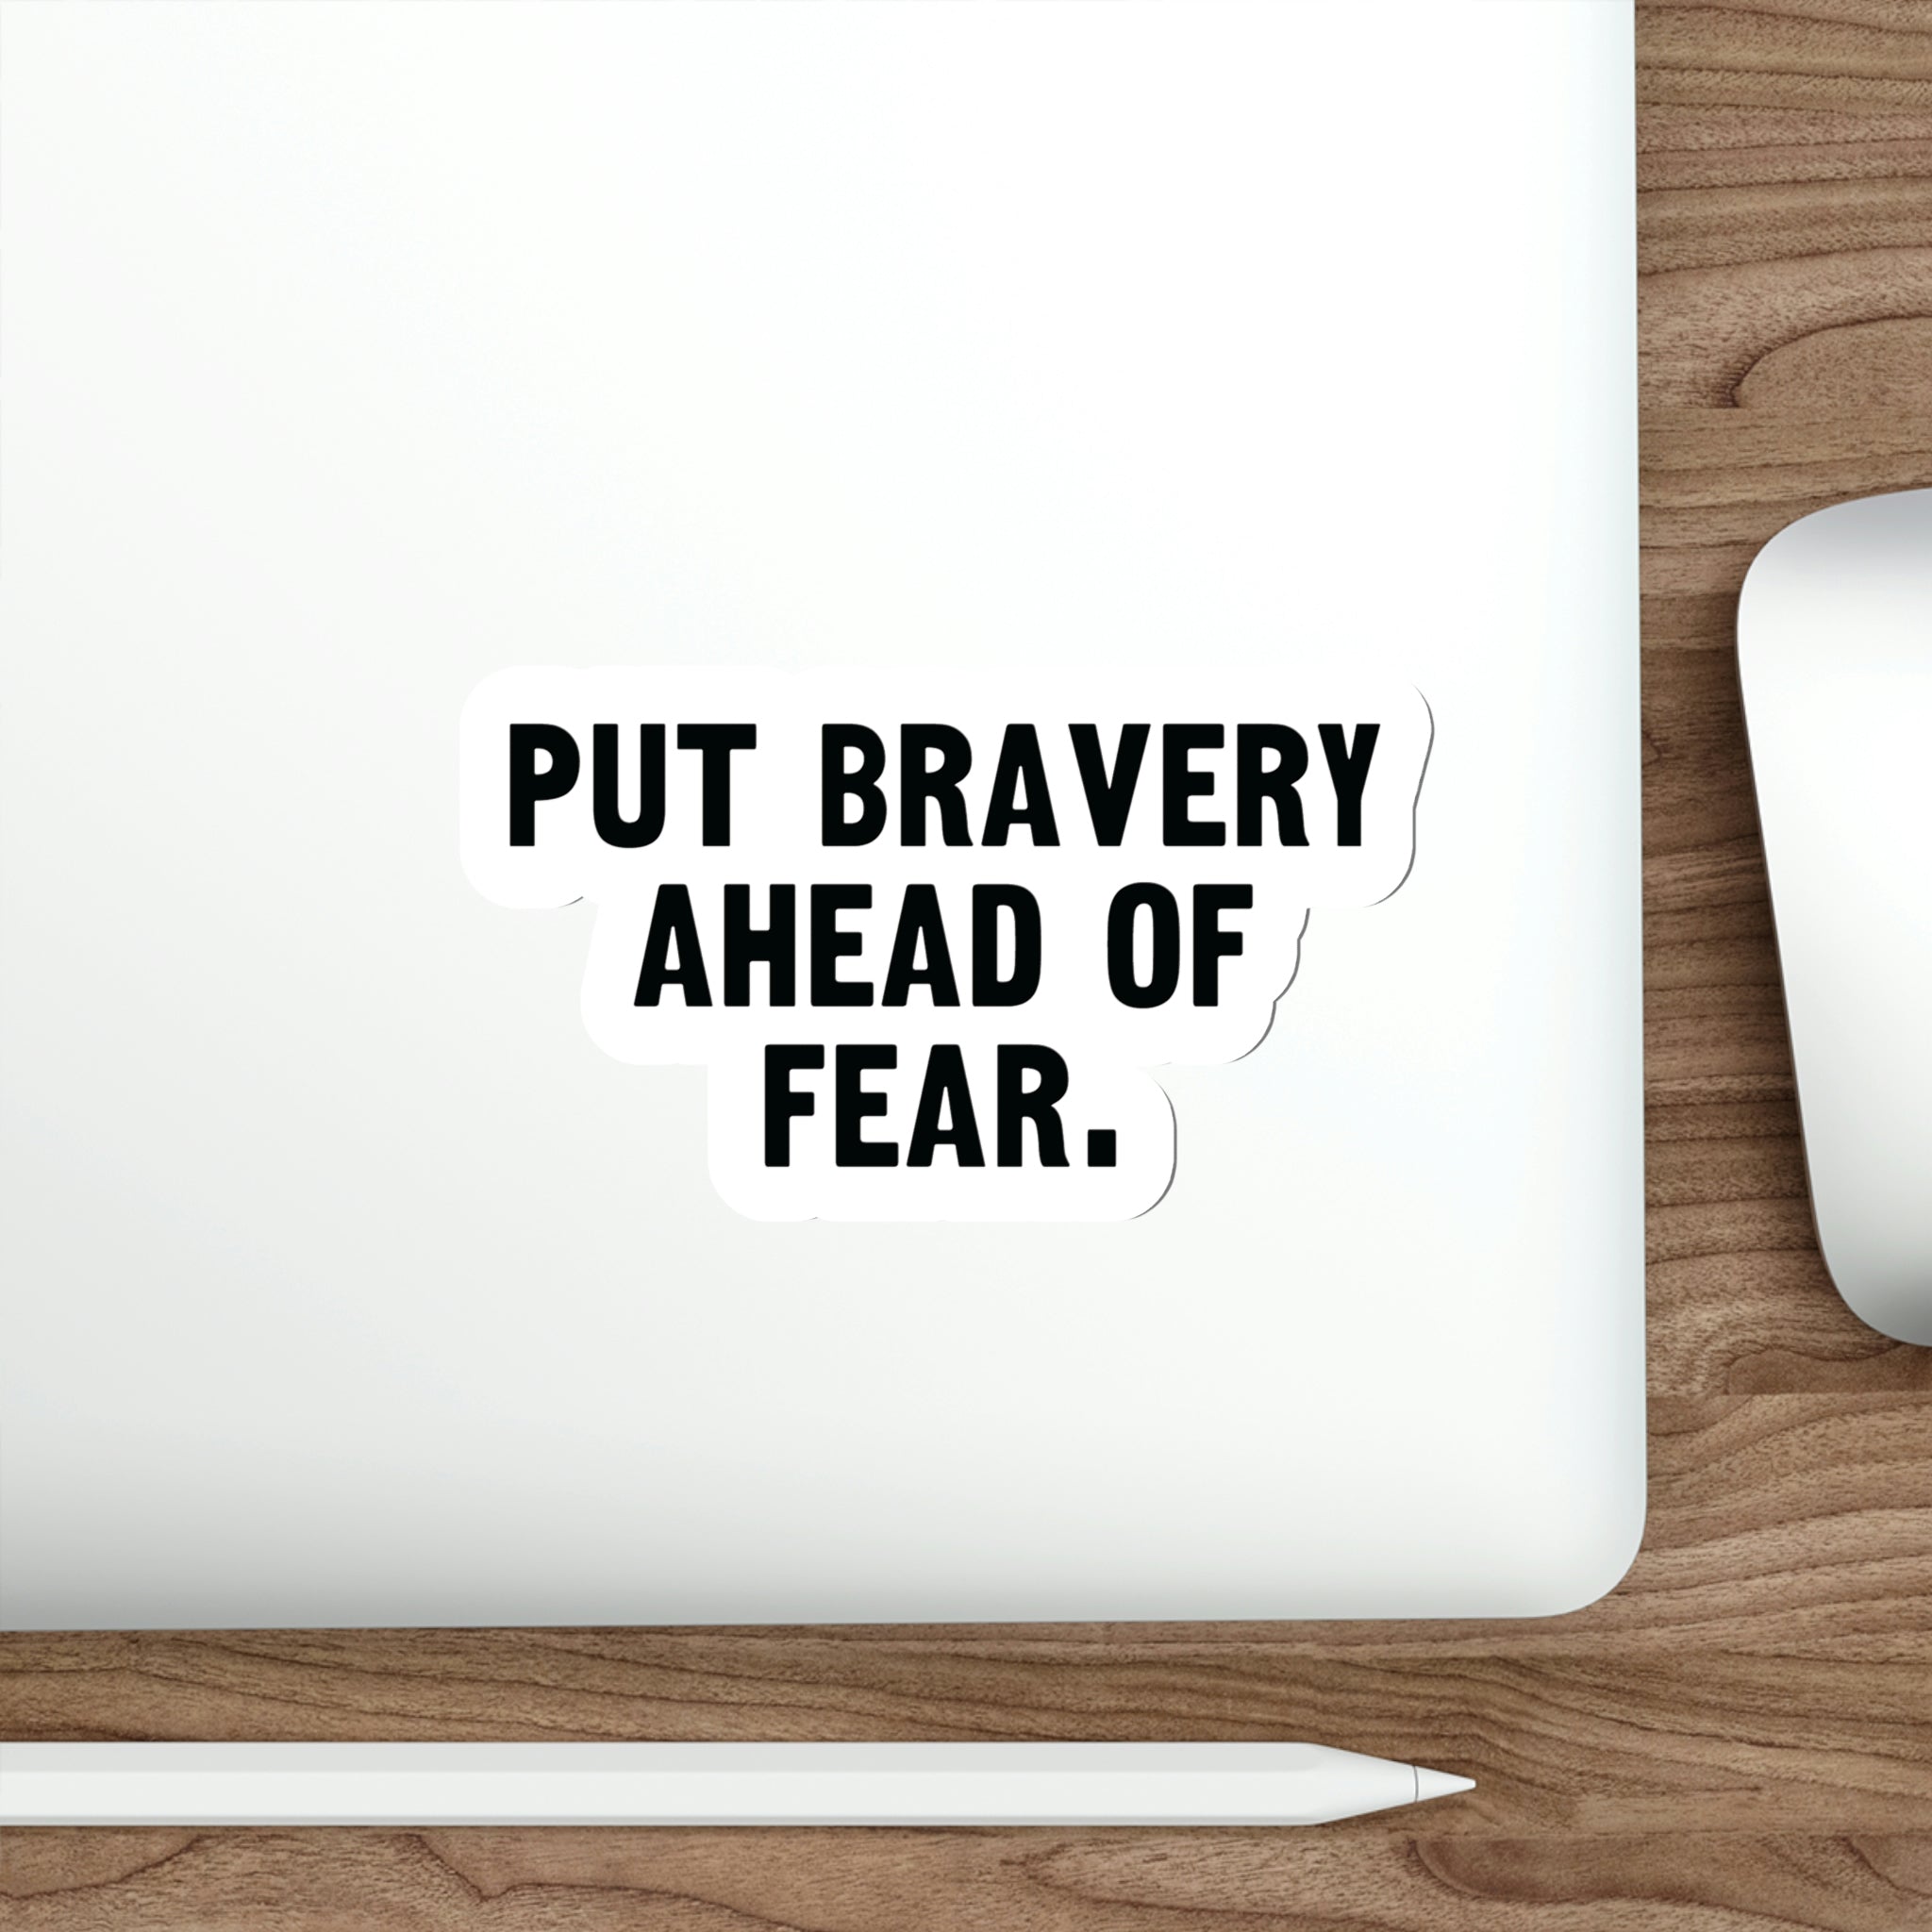 Put Bravery First - Overcome Your Fears with Courage! #size_6x6-inches